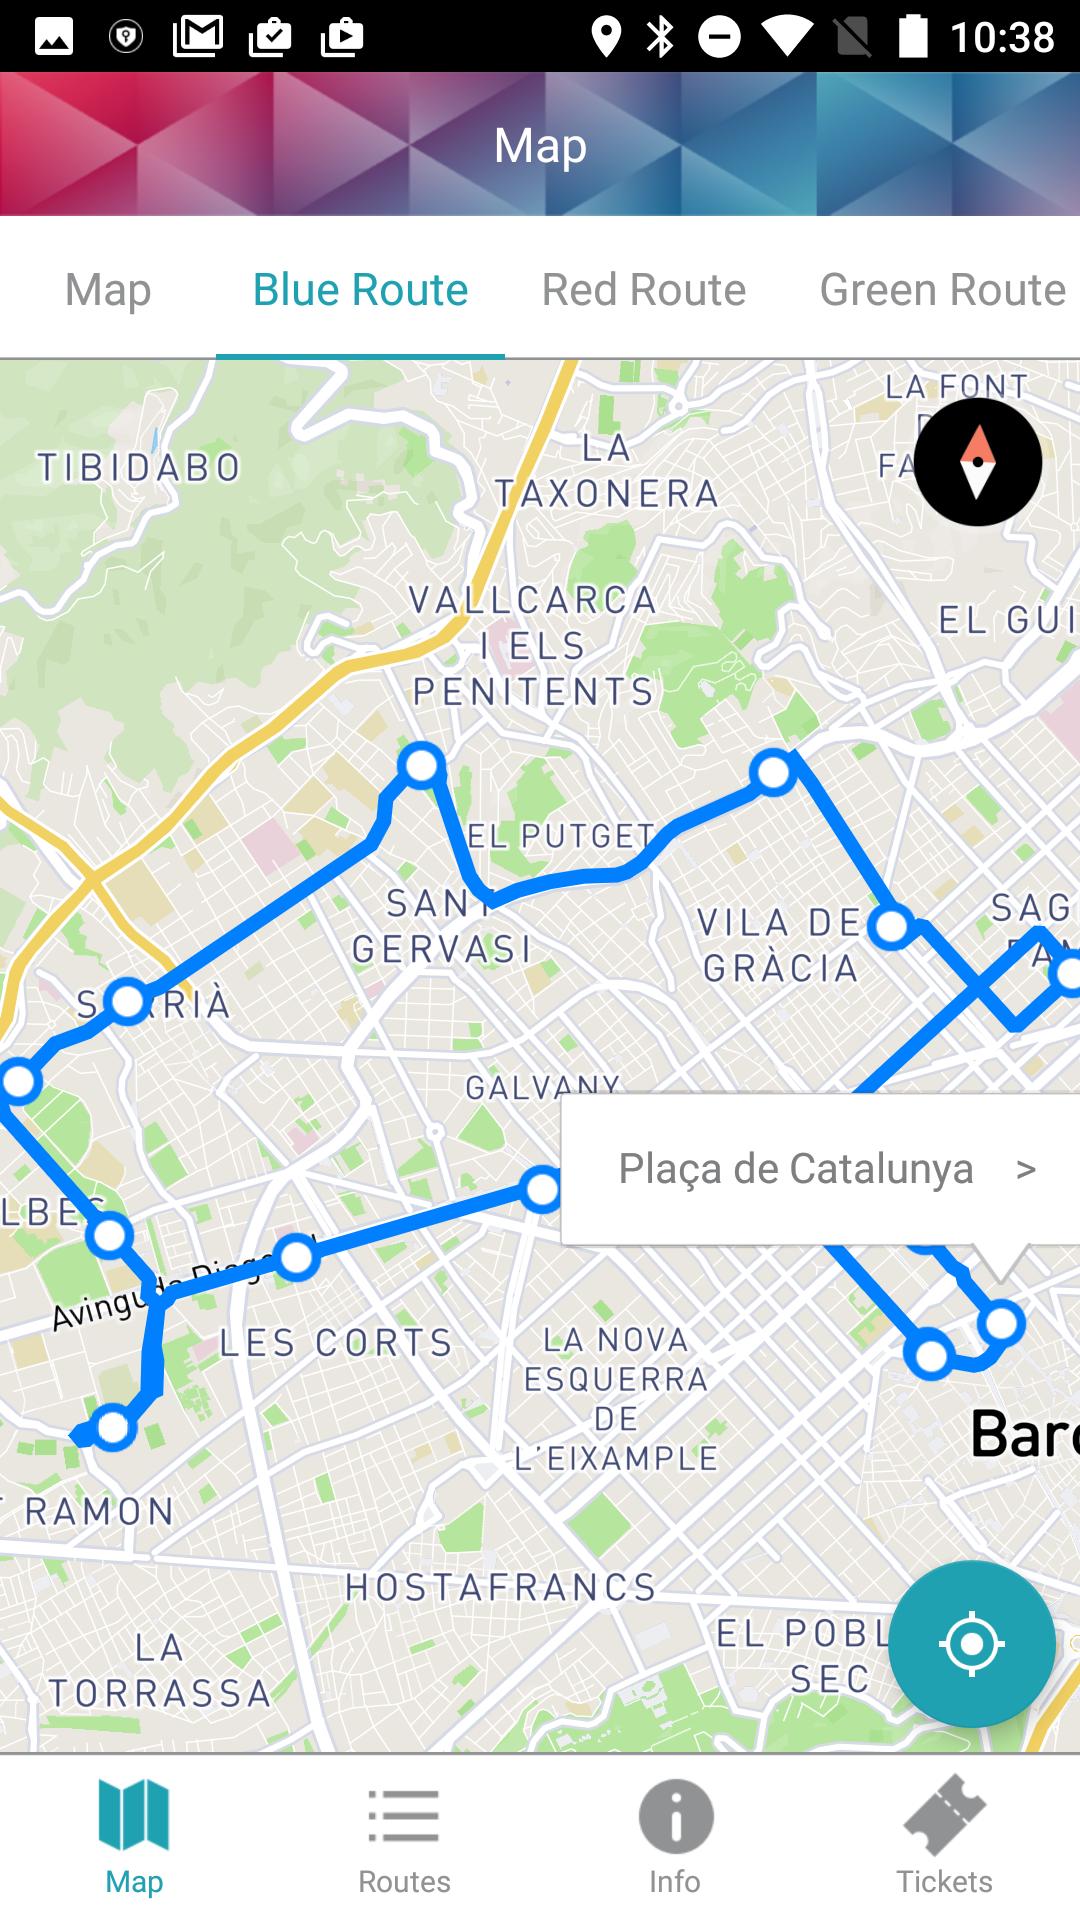 Barcelona Bus Turístic for Android - APK Download